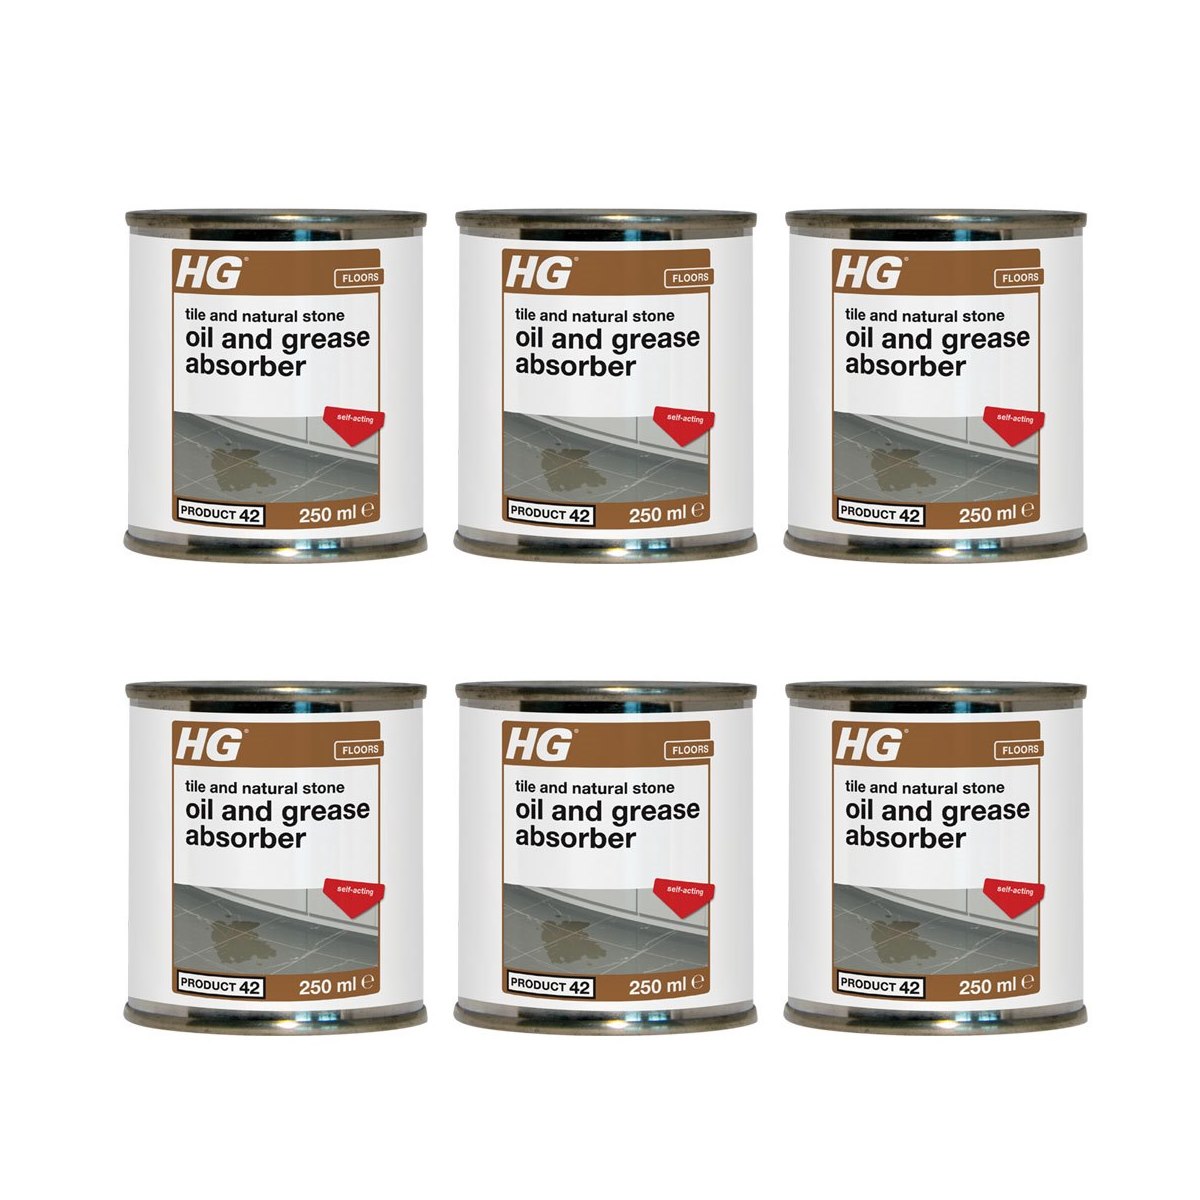 Case of 6 x Oil and Grease Absorber 250ml Product 42